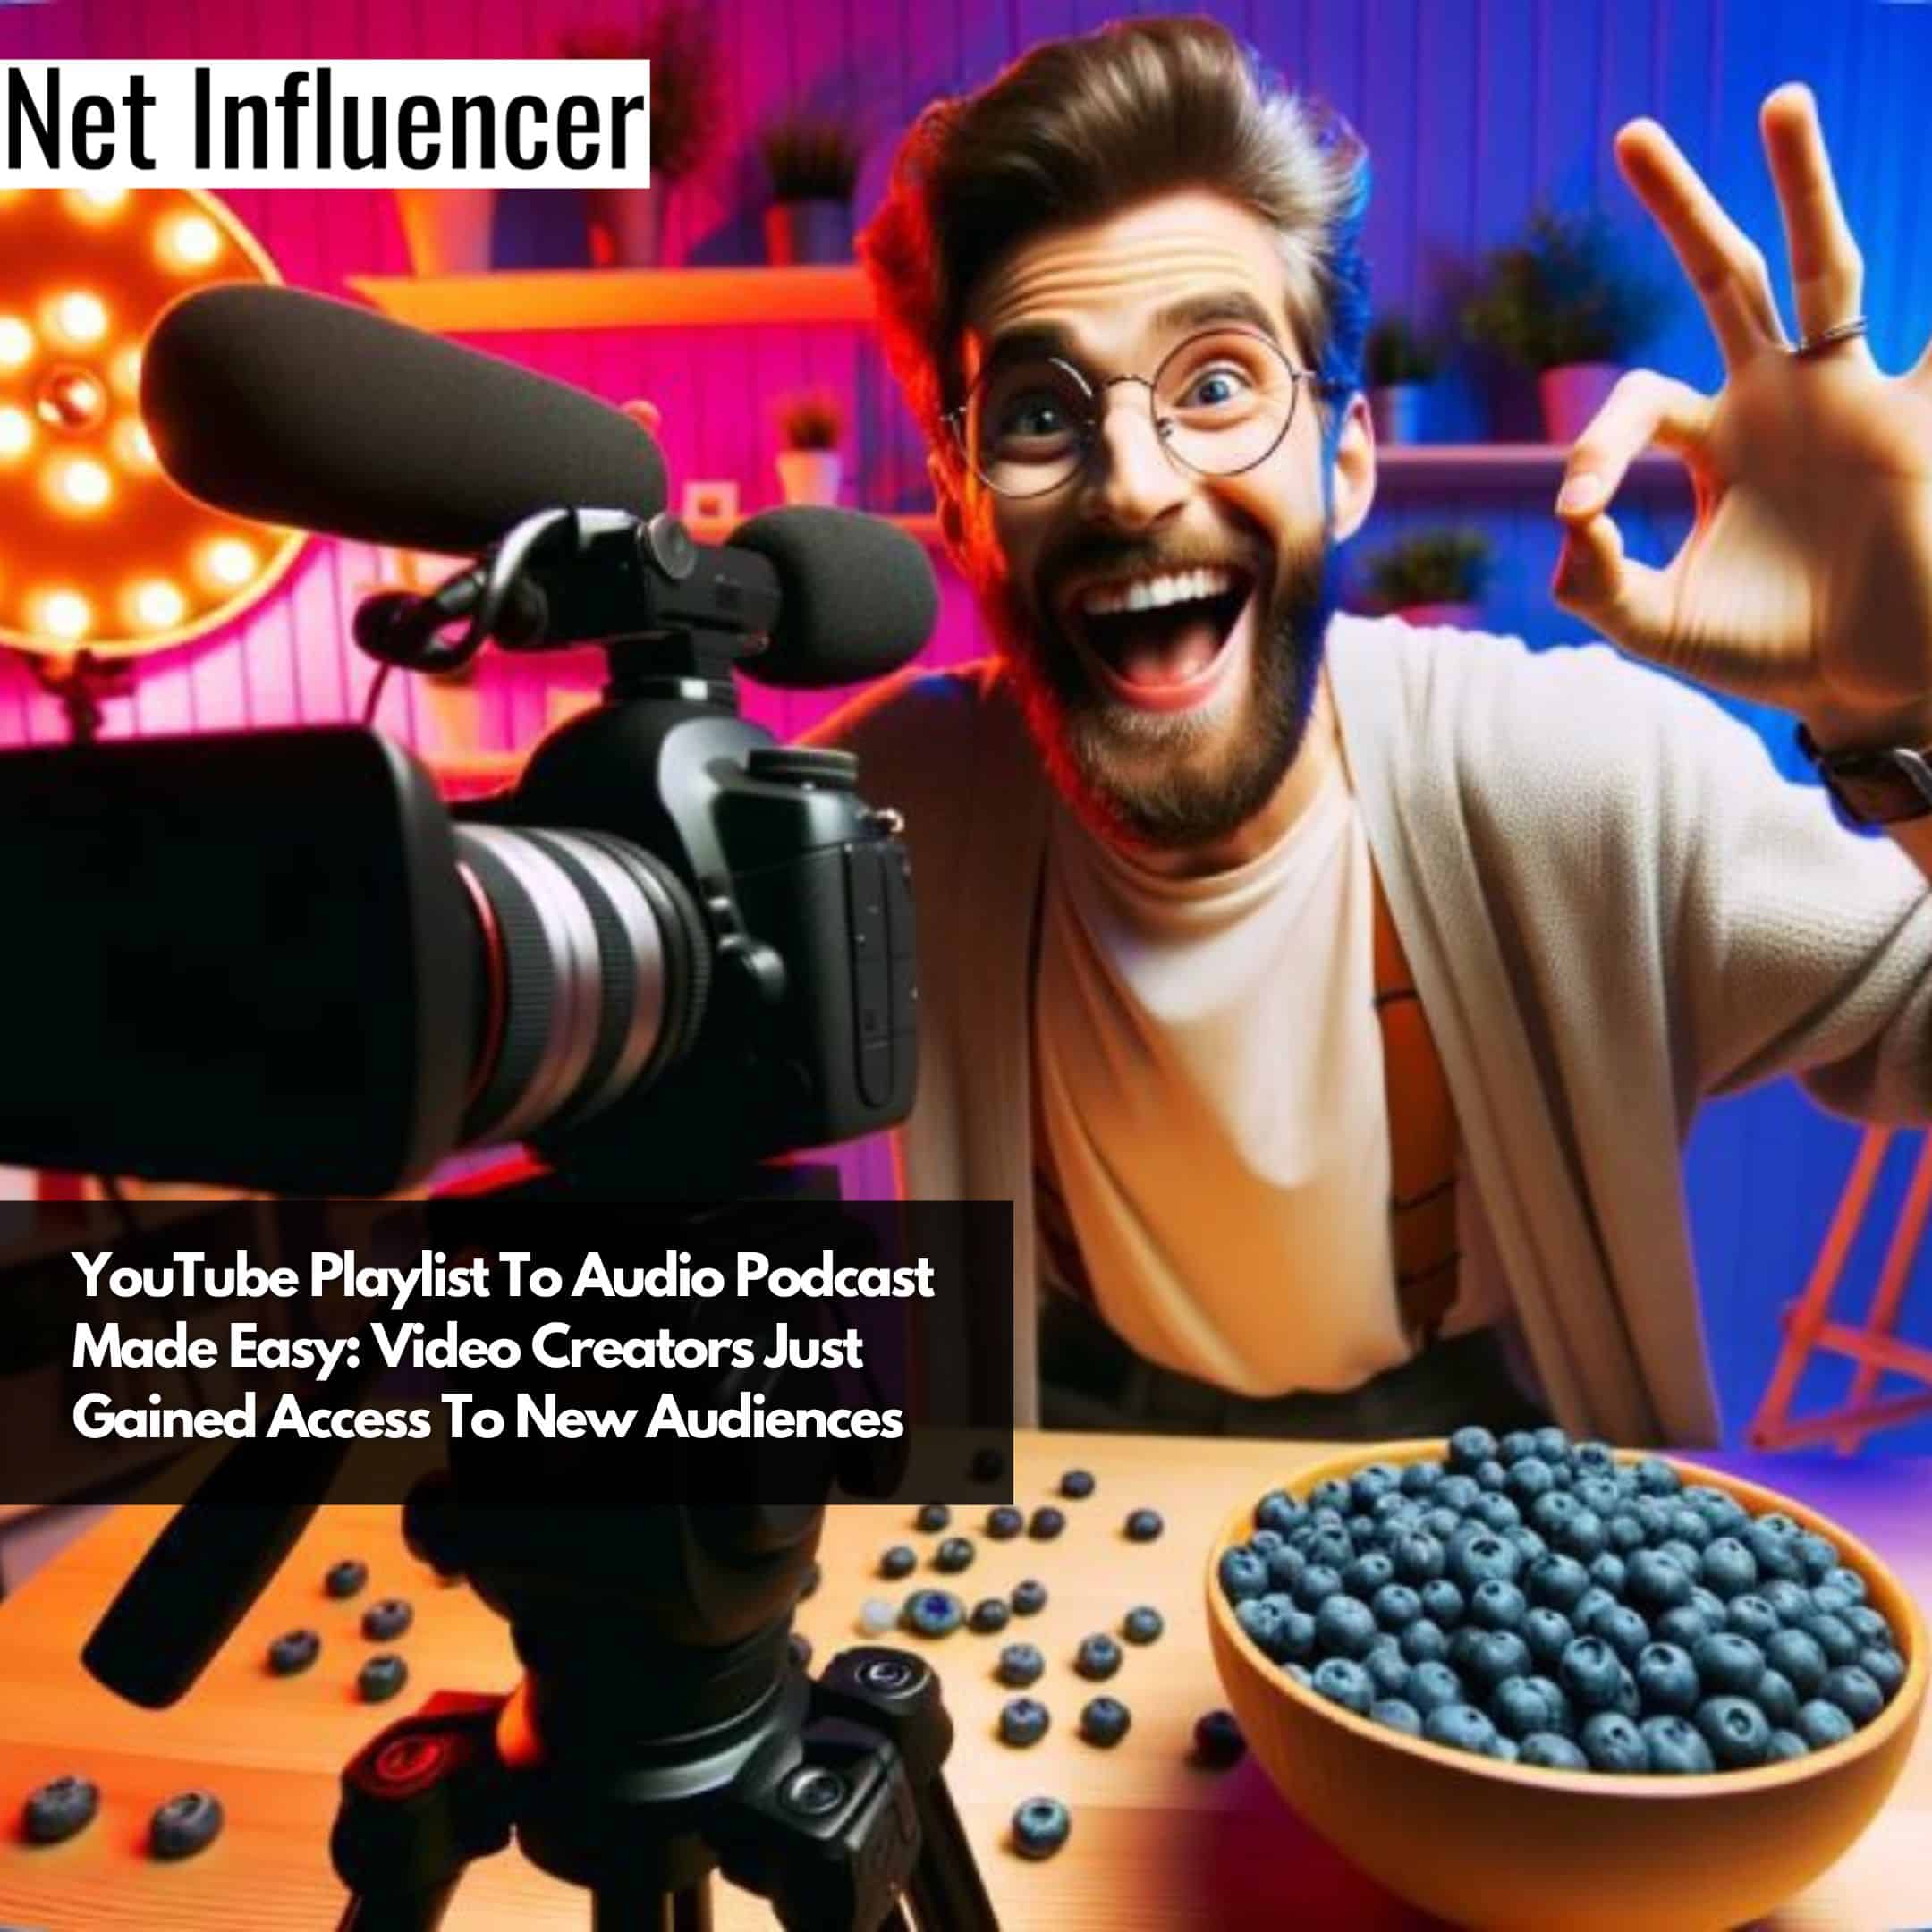 YouTube Playlist To Audio Podcast Made Easy Video Creators Just Gained Access To New Audiences